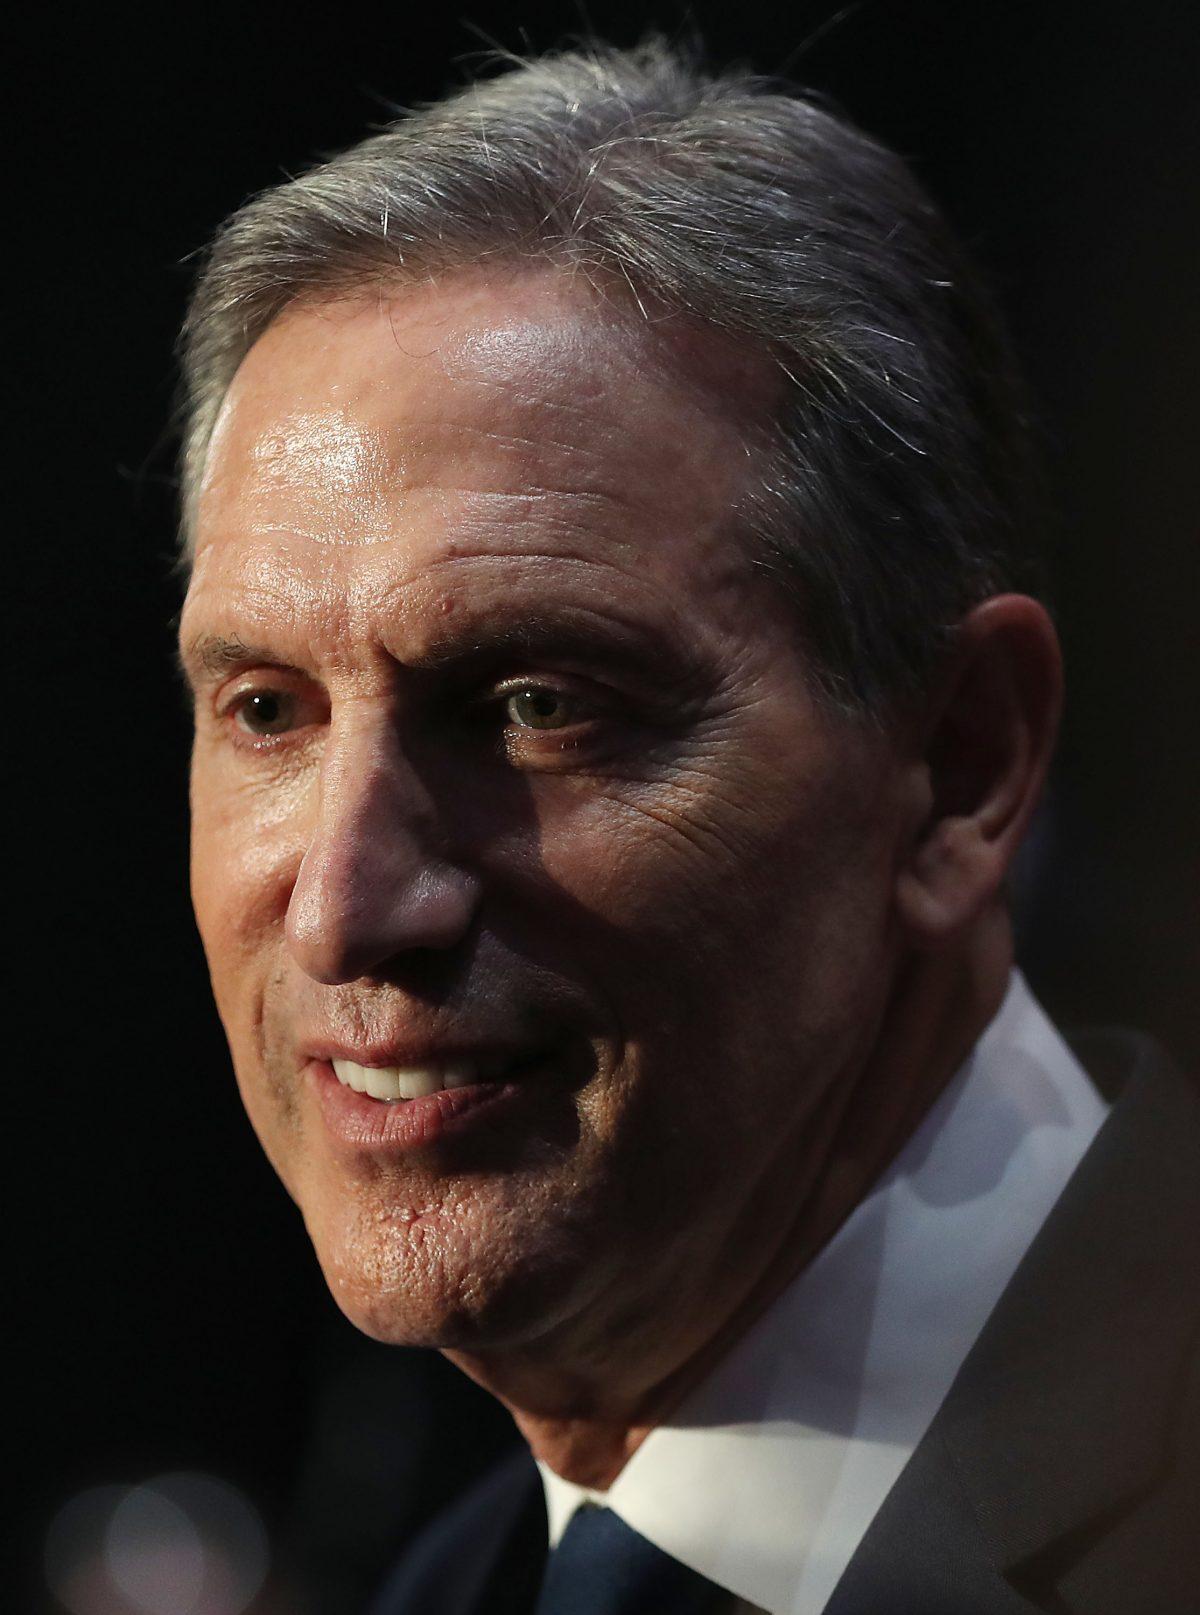 Former Starbucks CEO Howard Schultz speaks during a stop at Miami Dade College as he seeks a possible independent presidency run in Miami, Fla., on March 13, 2019. (Joe Raedle/Getty Images)